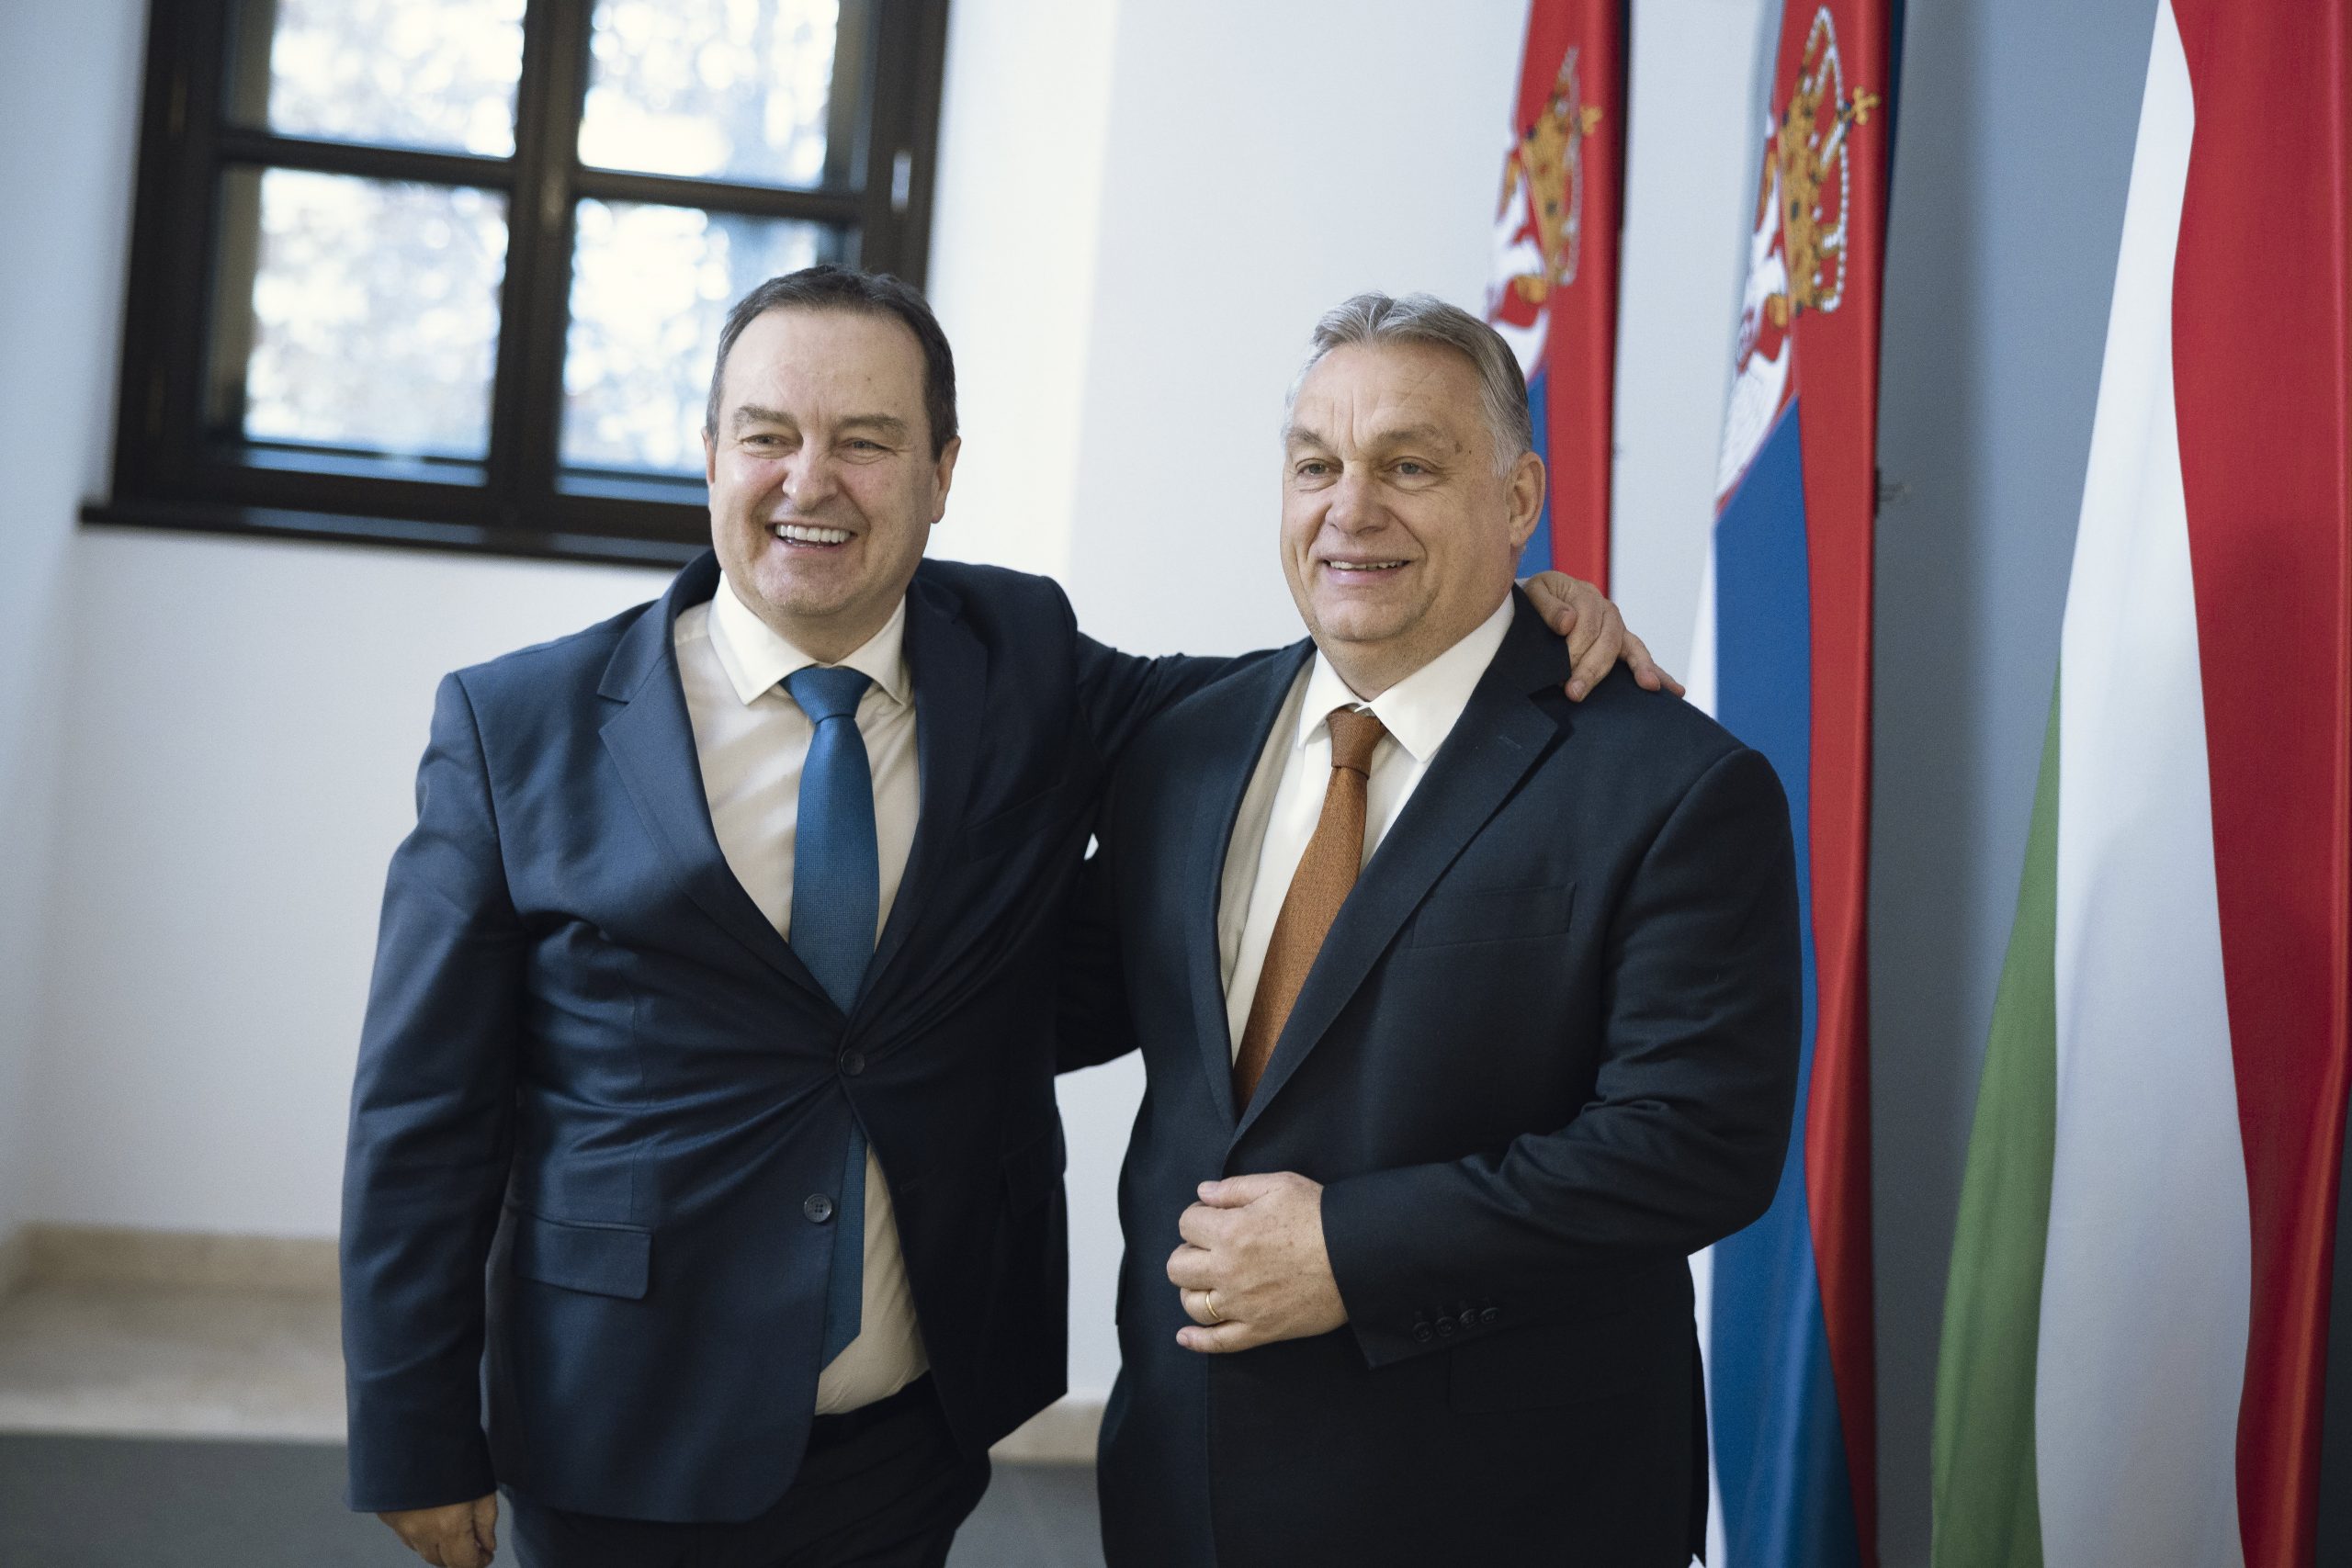 Hungary and Serbia Face the Same Security Challenges